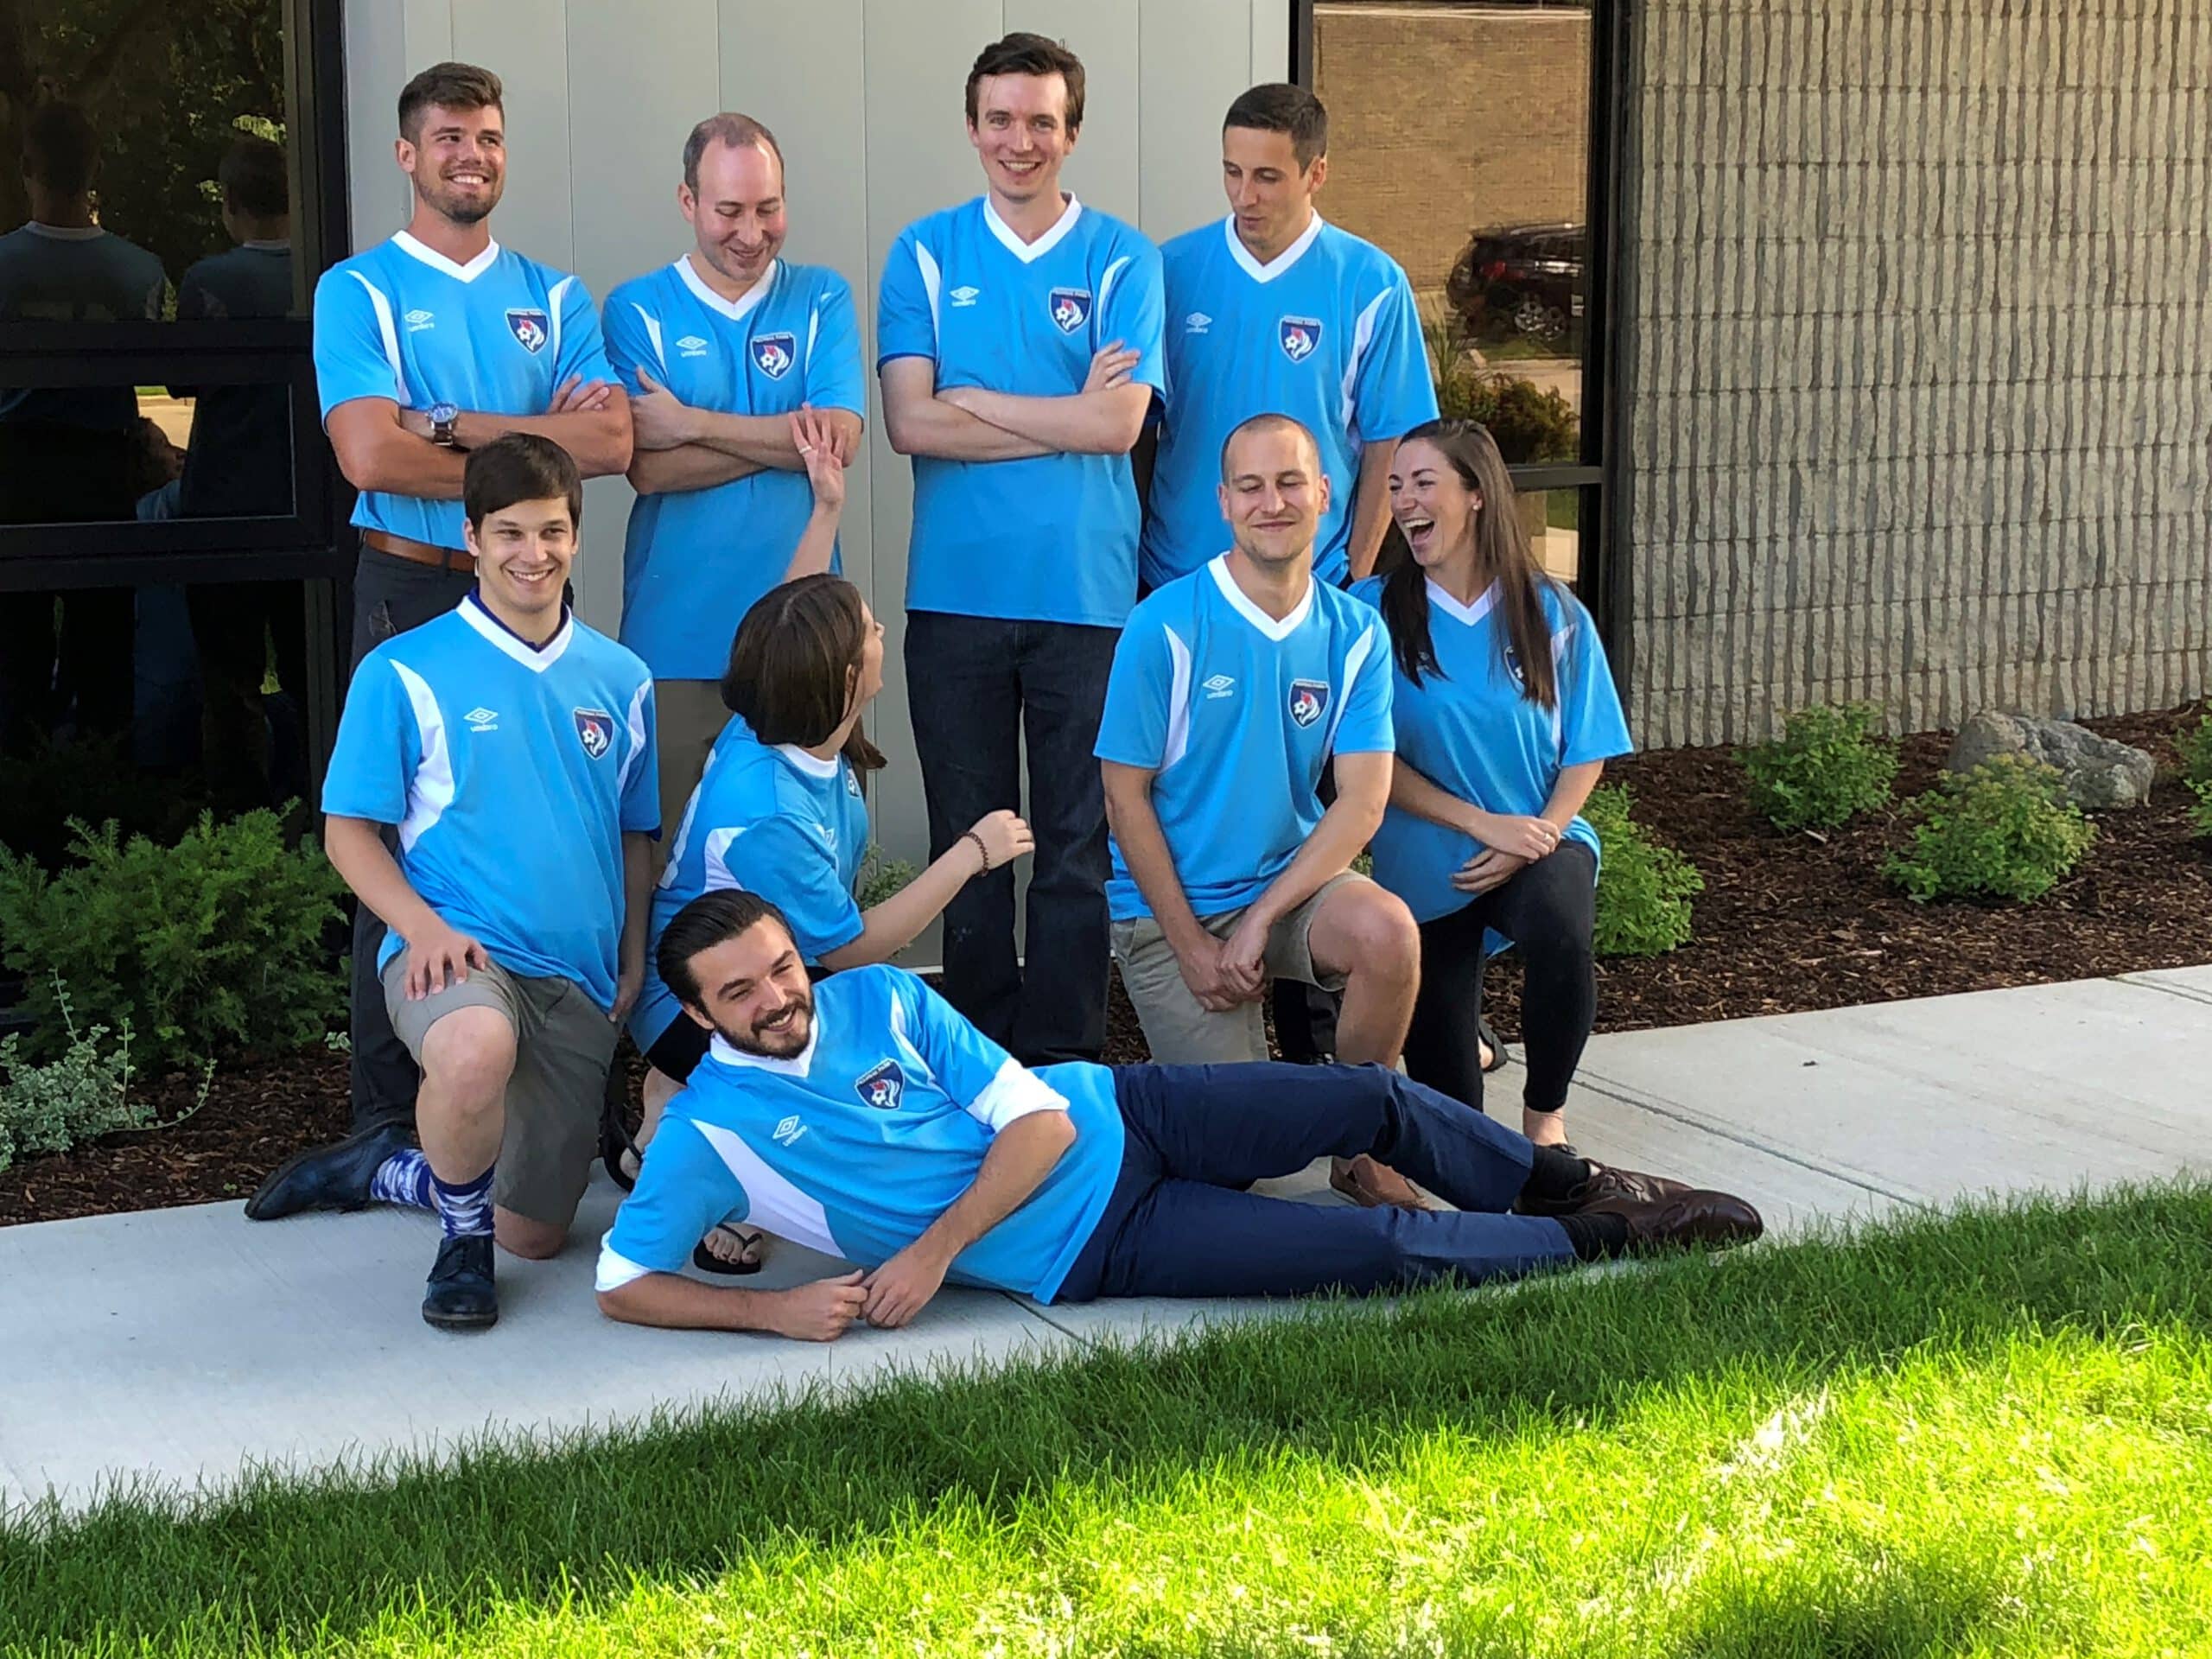 An image of the Ford Keast LLP soccer team